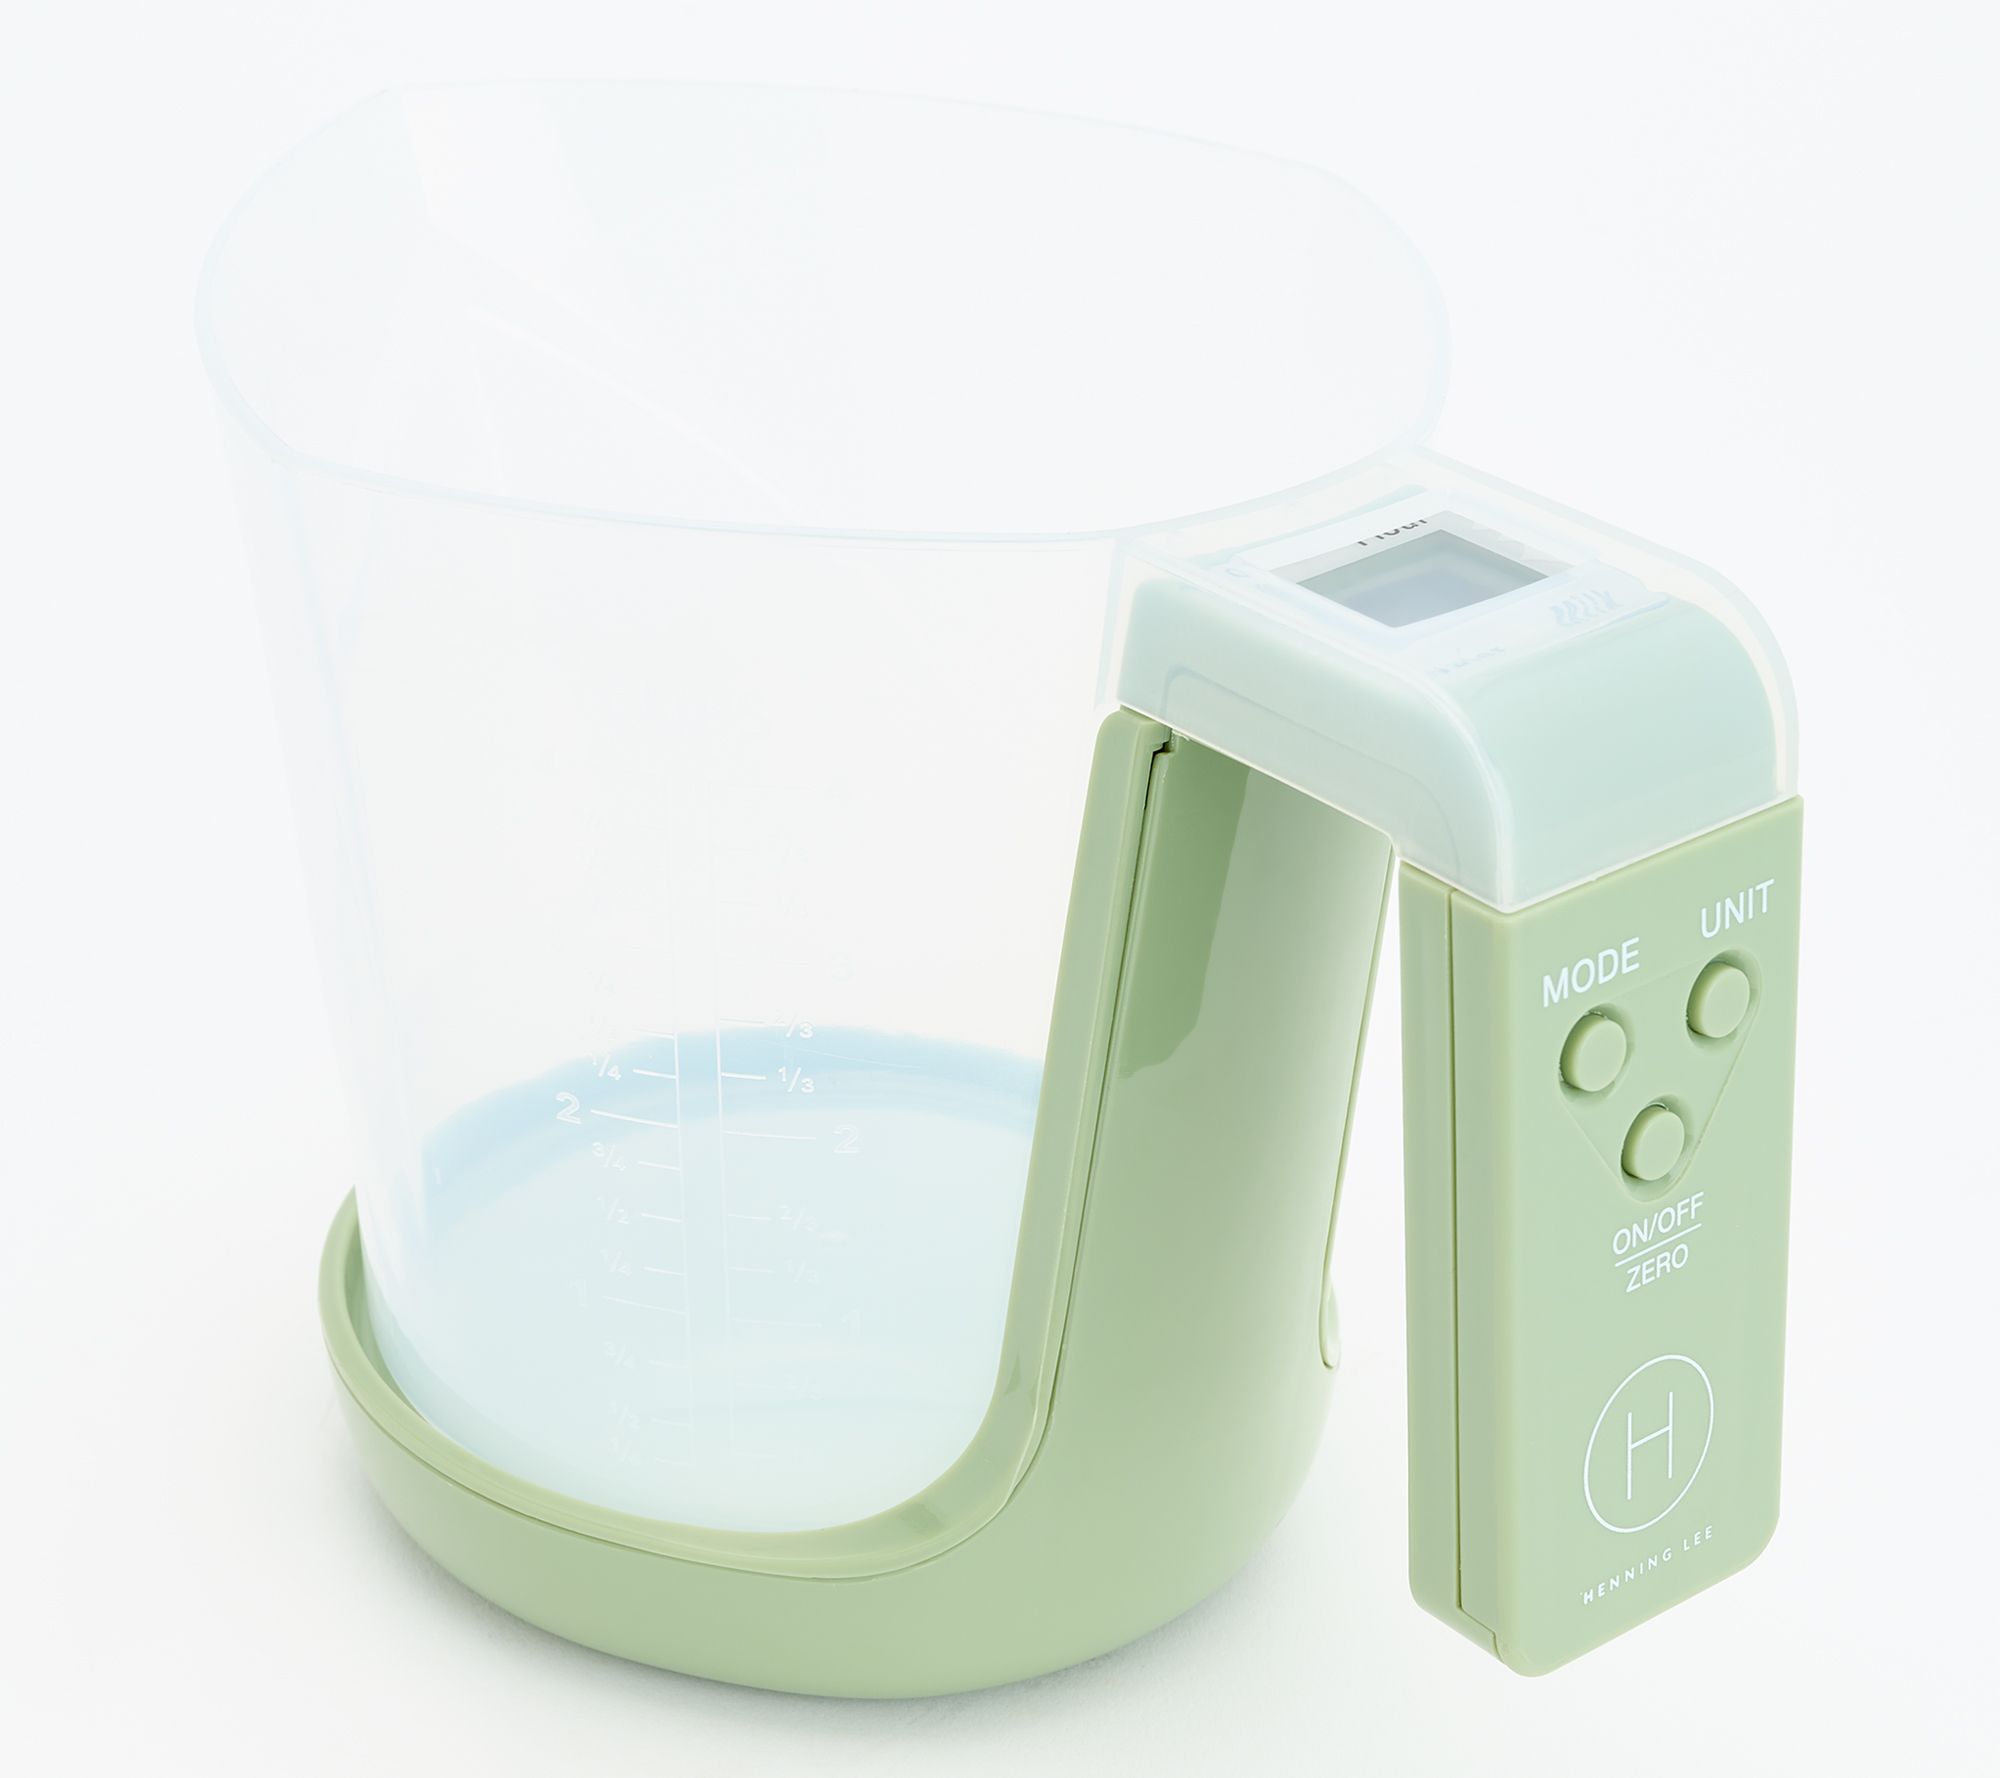 4-cup Measuring Cup